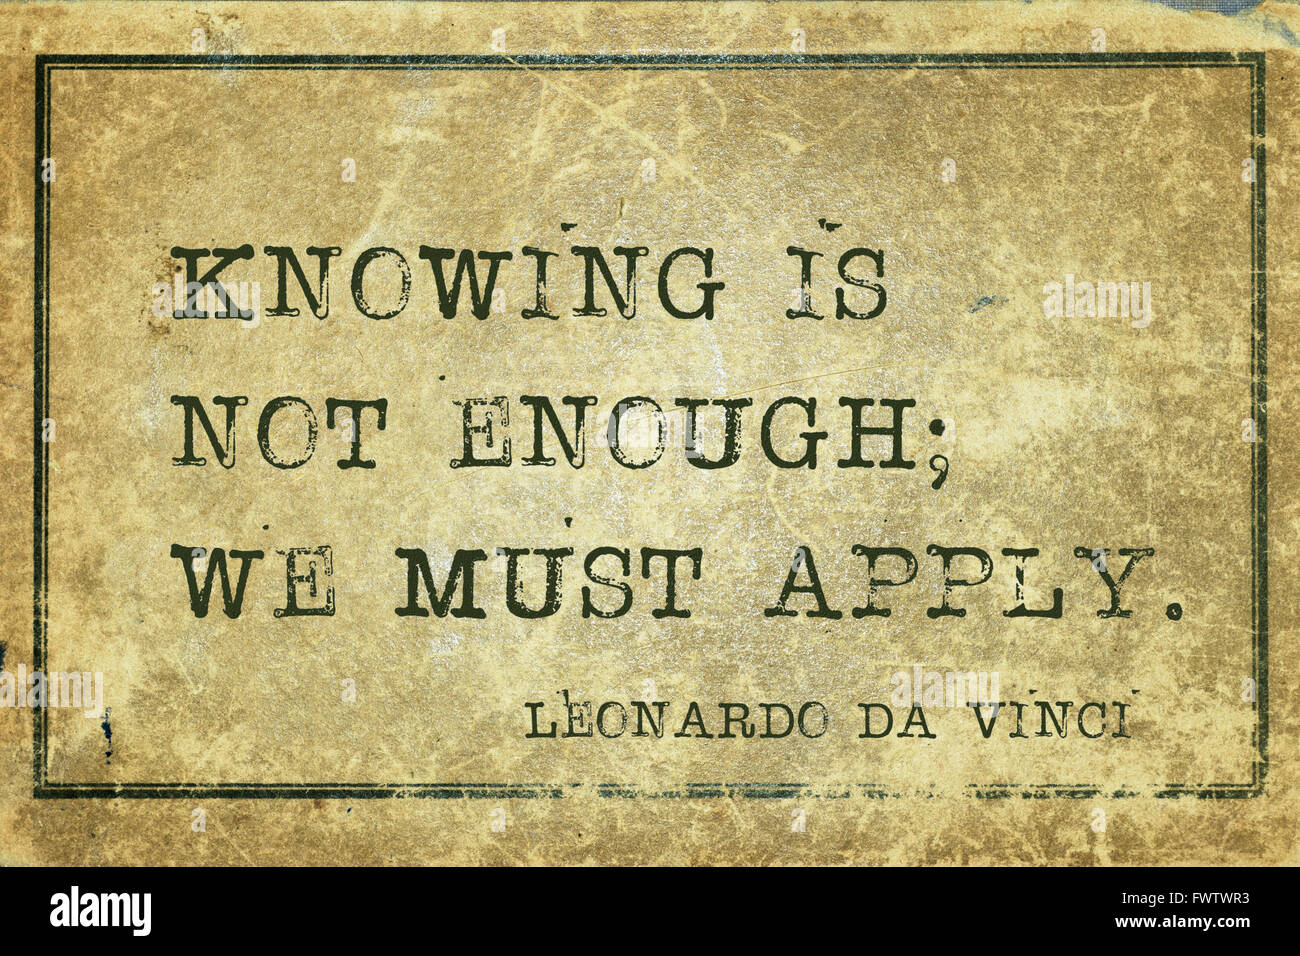 Knowing is not enough; we must apply - ancient Italian artist Leonardo da Vinci quote printed on grunge vintage cardboard Stock Photo